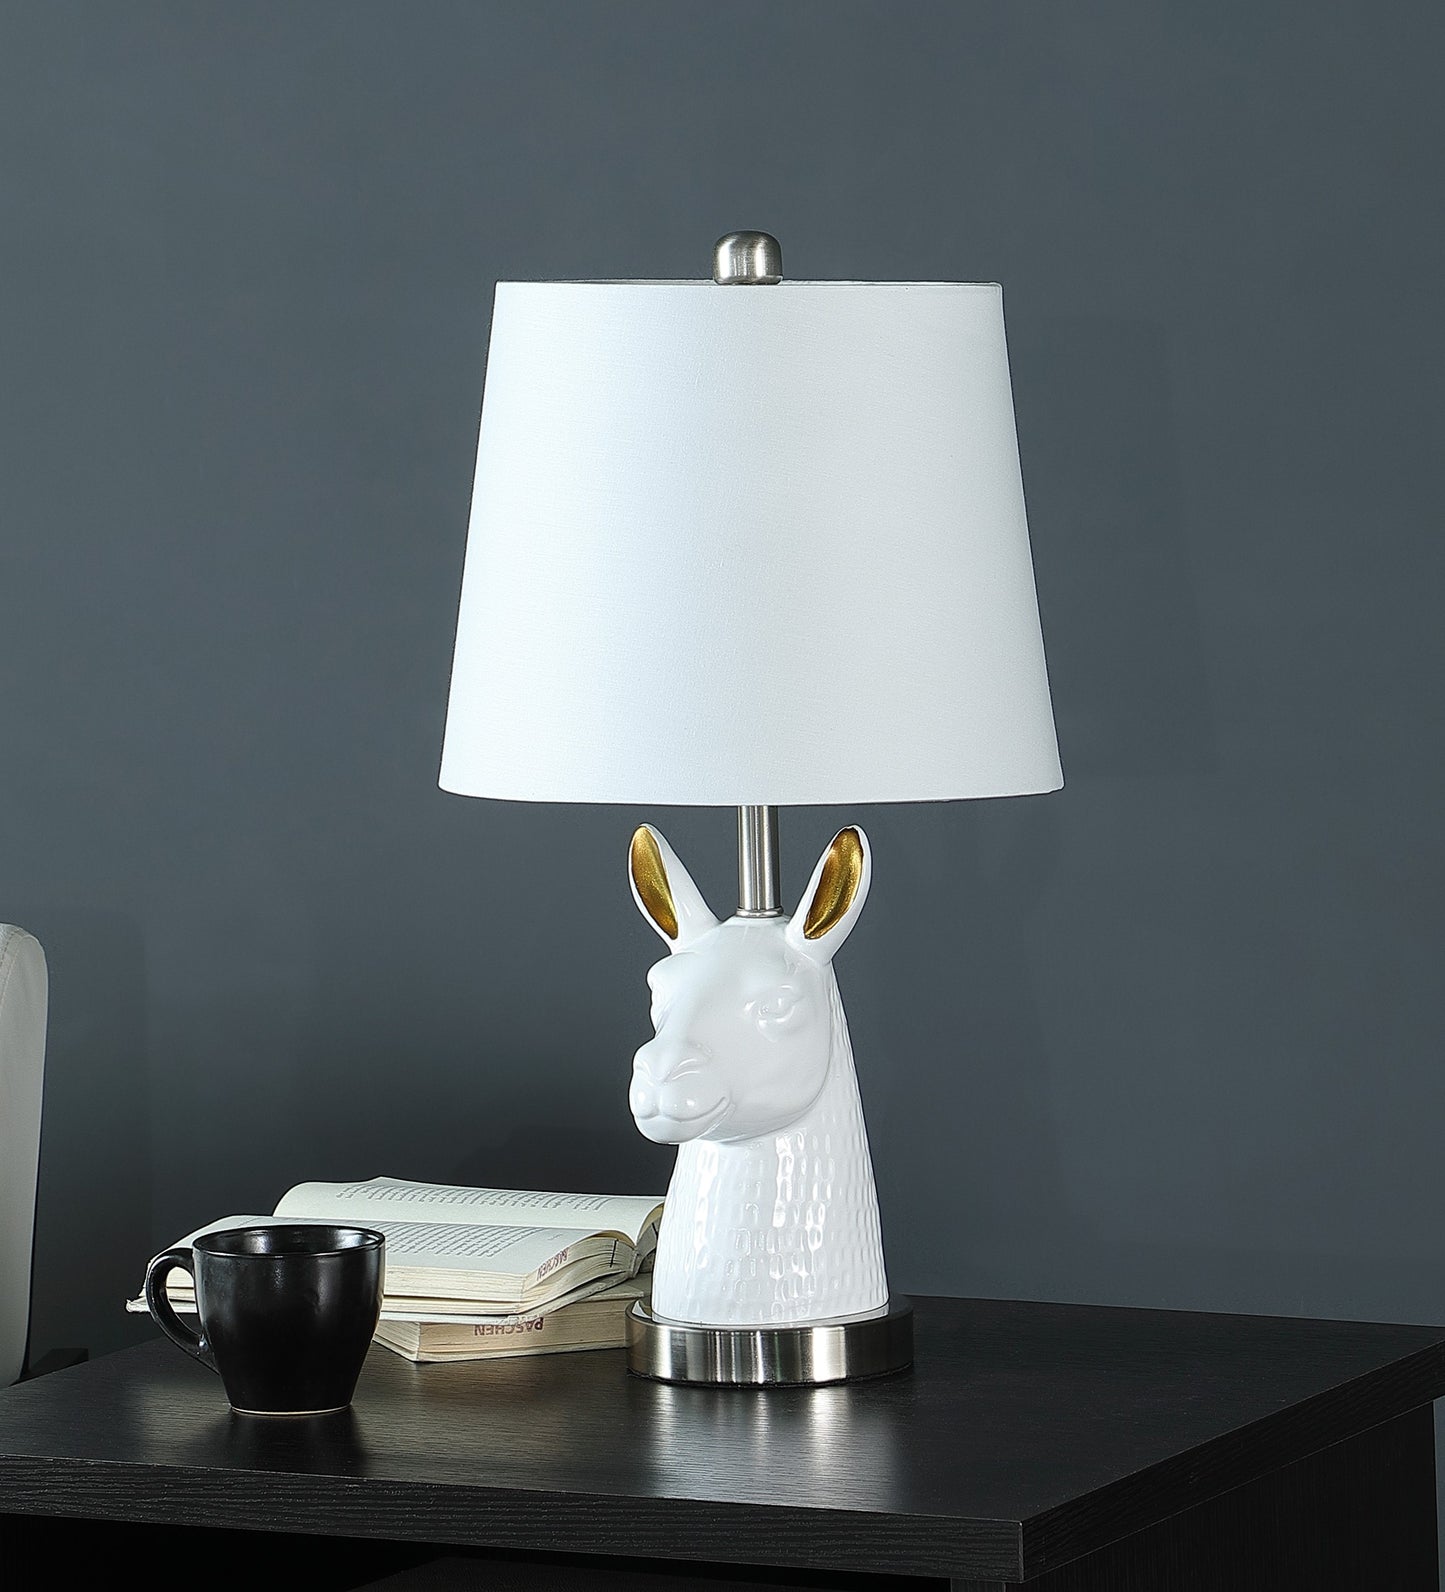 21" Silver Bedside Table Lamp With White Empire Shade